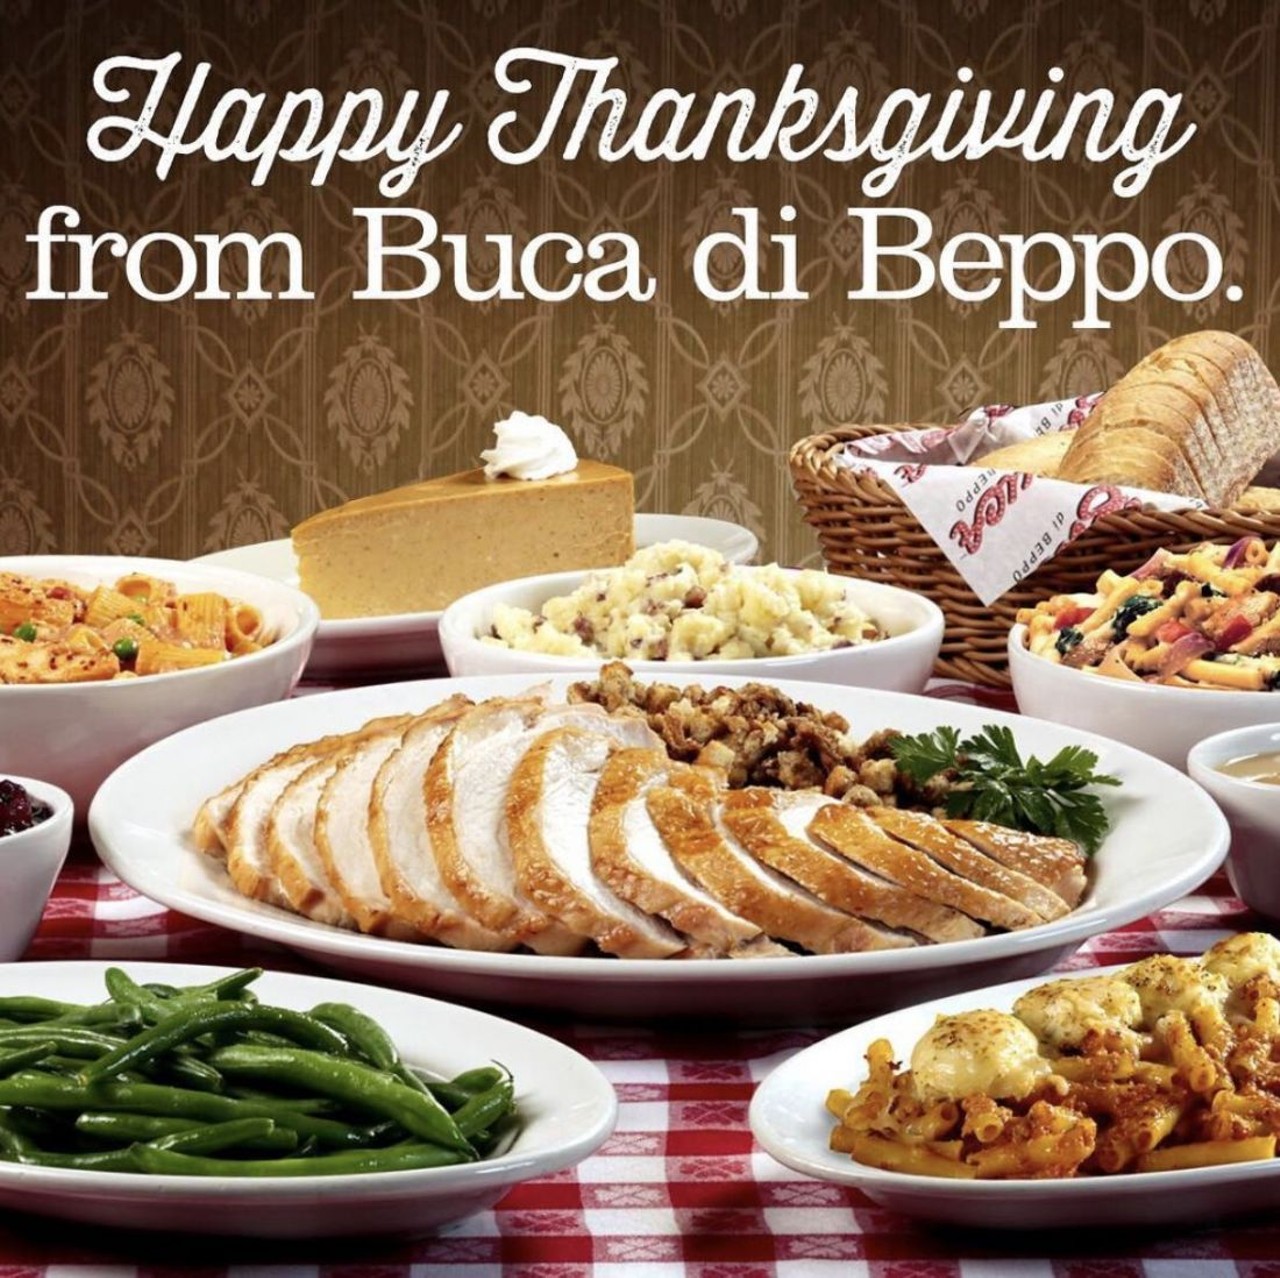 Buca di Beppo
38888 Six Mile Rd, Livonia, MI 48152
Buca&#146;s menu will be family style per usual, but their traditional Italian dinners will be swapped out with an entire Thanksgiving feast. 
Photo via Buca di Beppo Instagram @bucadibeppo